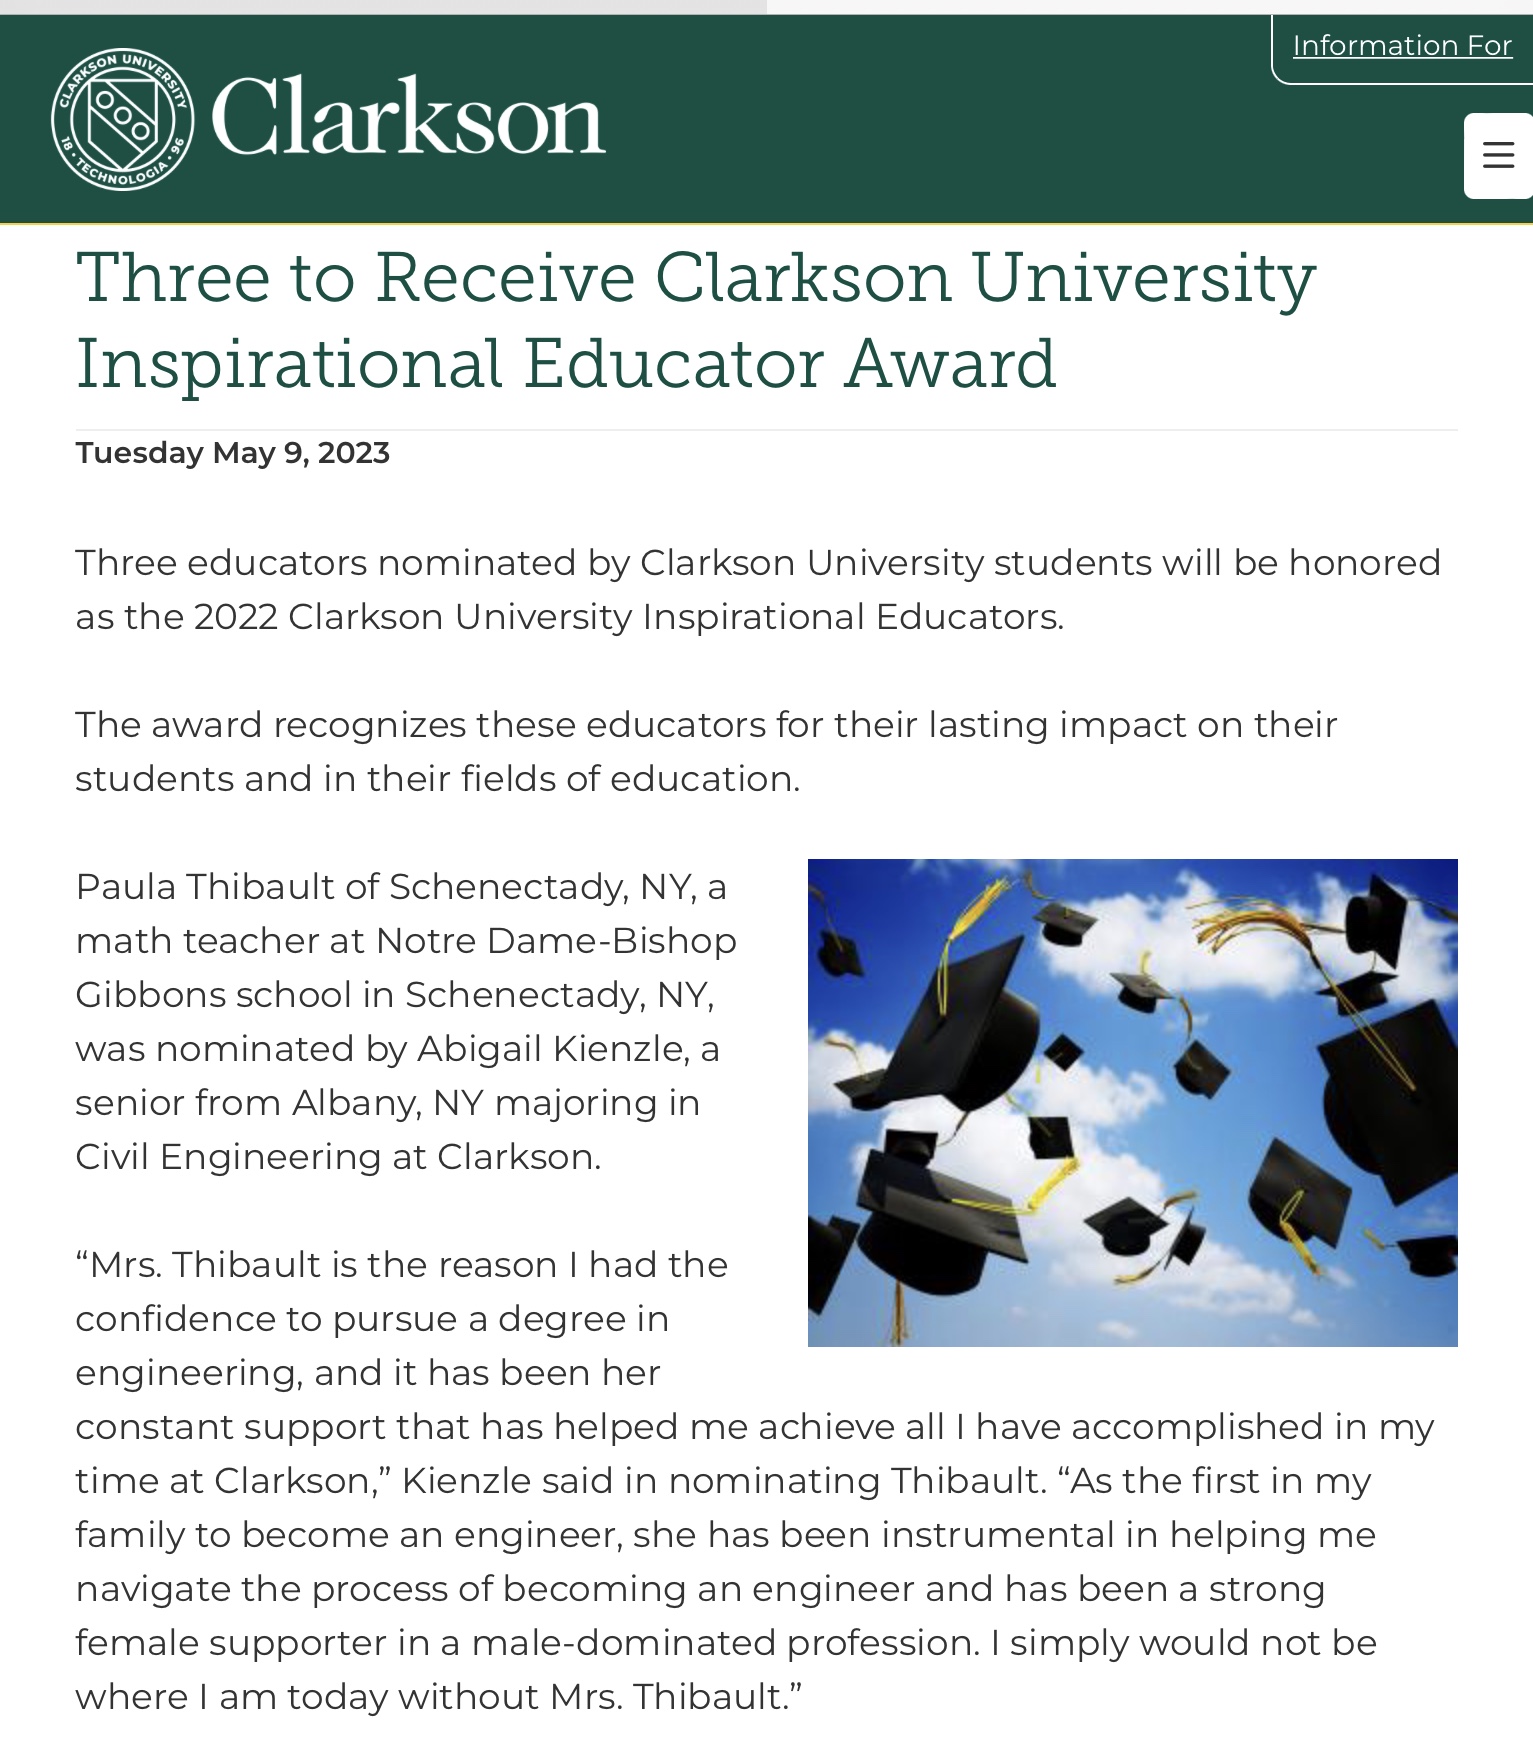 Mrs. Thibault Honored by Clarkson University